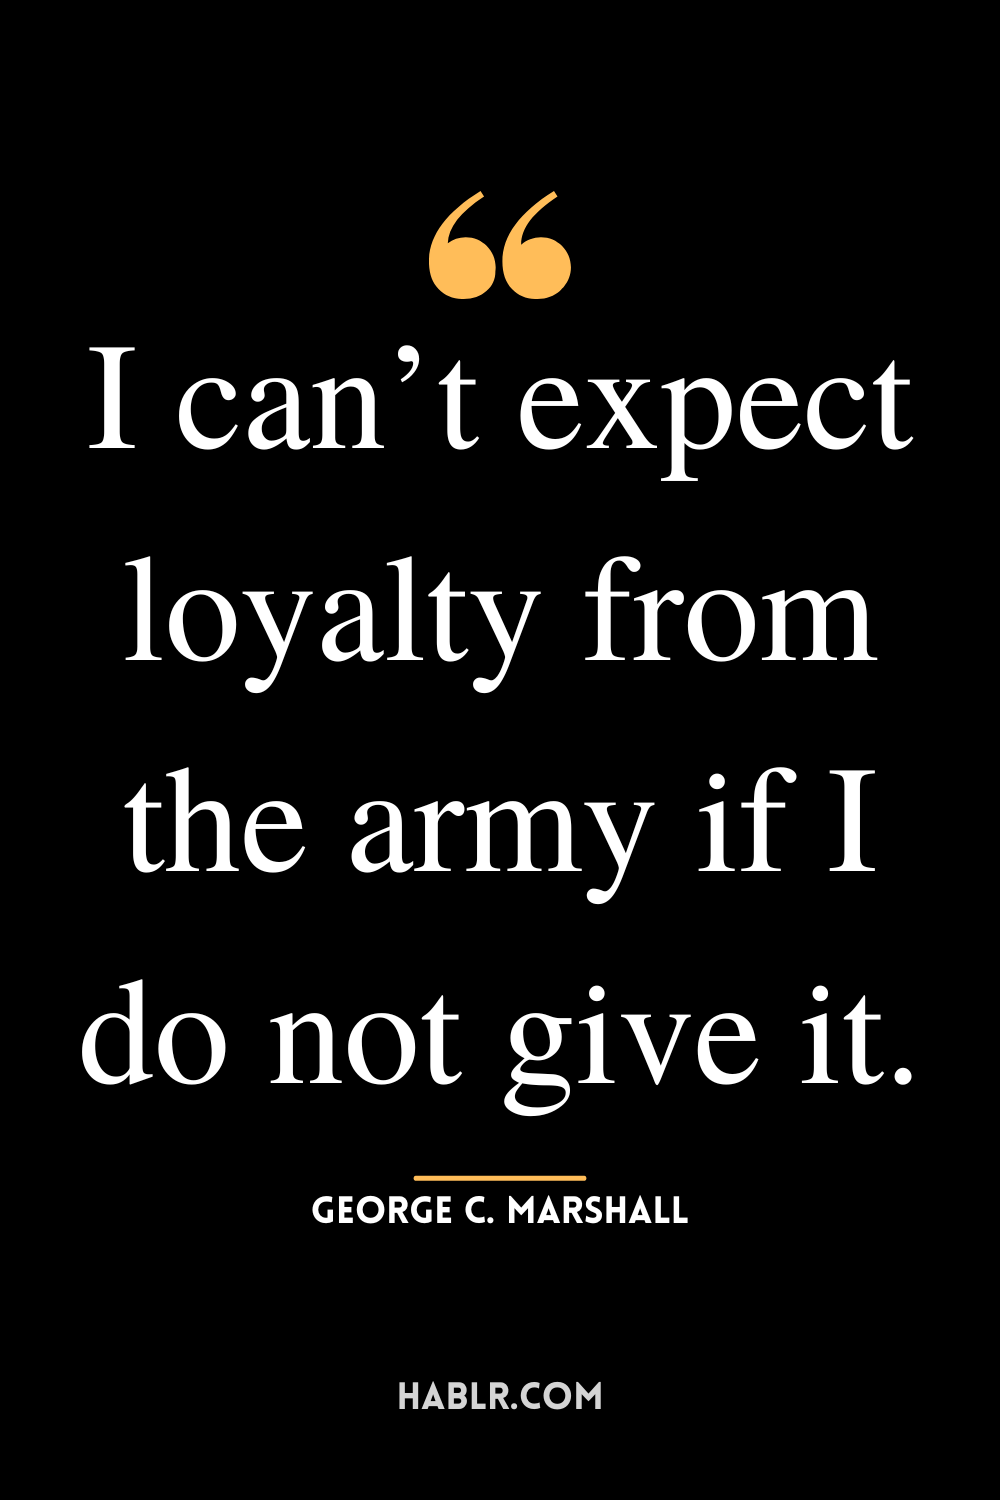 “I can’t expect loyalty from the army if I do not give it.”-George C. Marshall